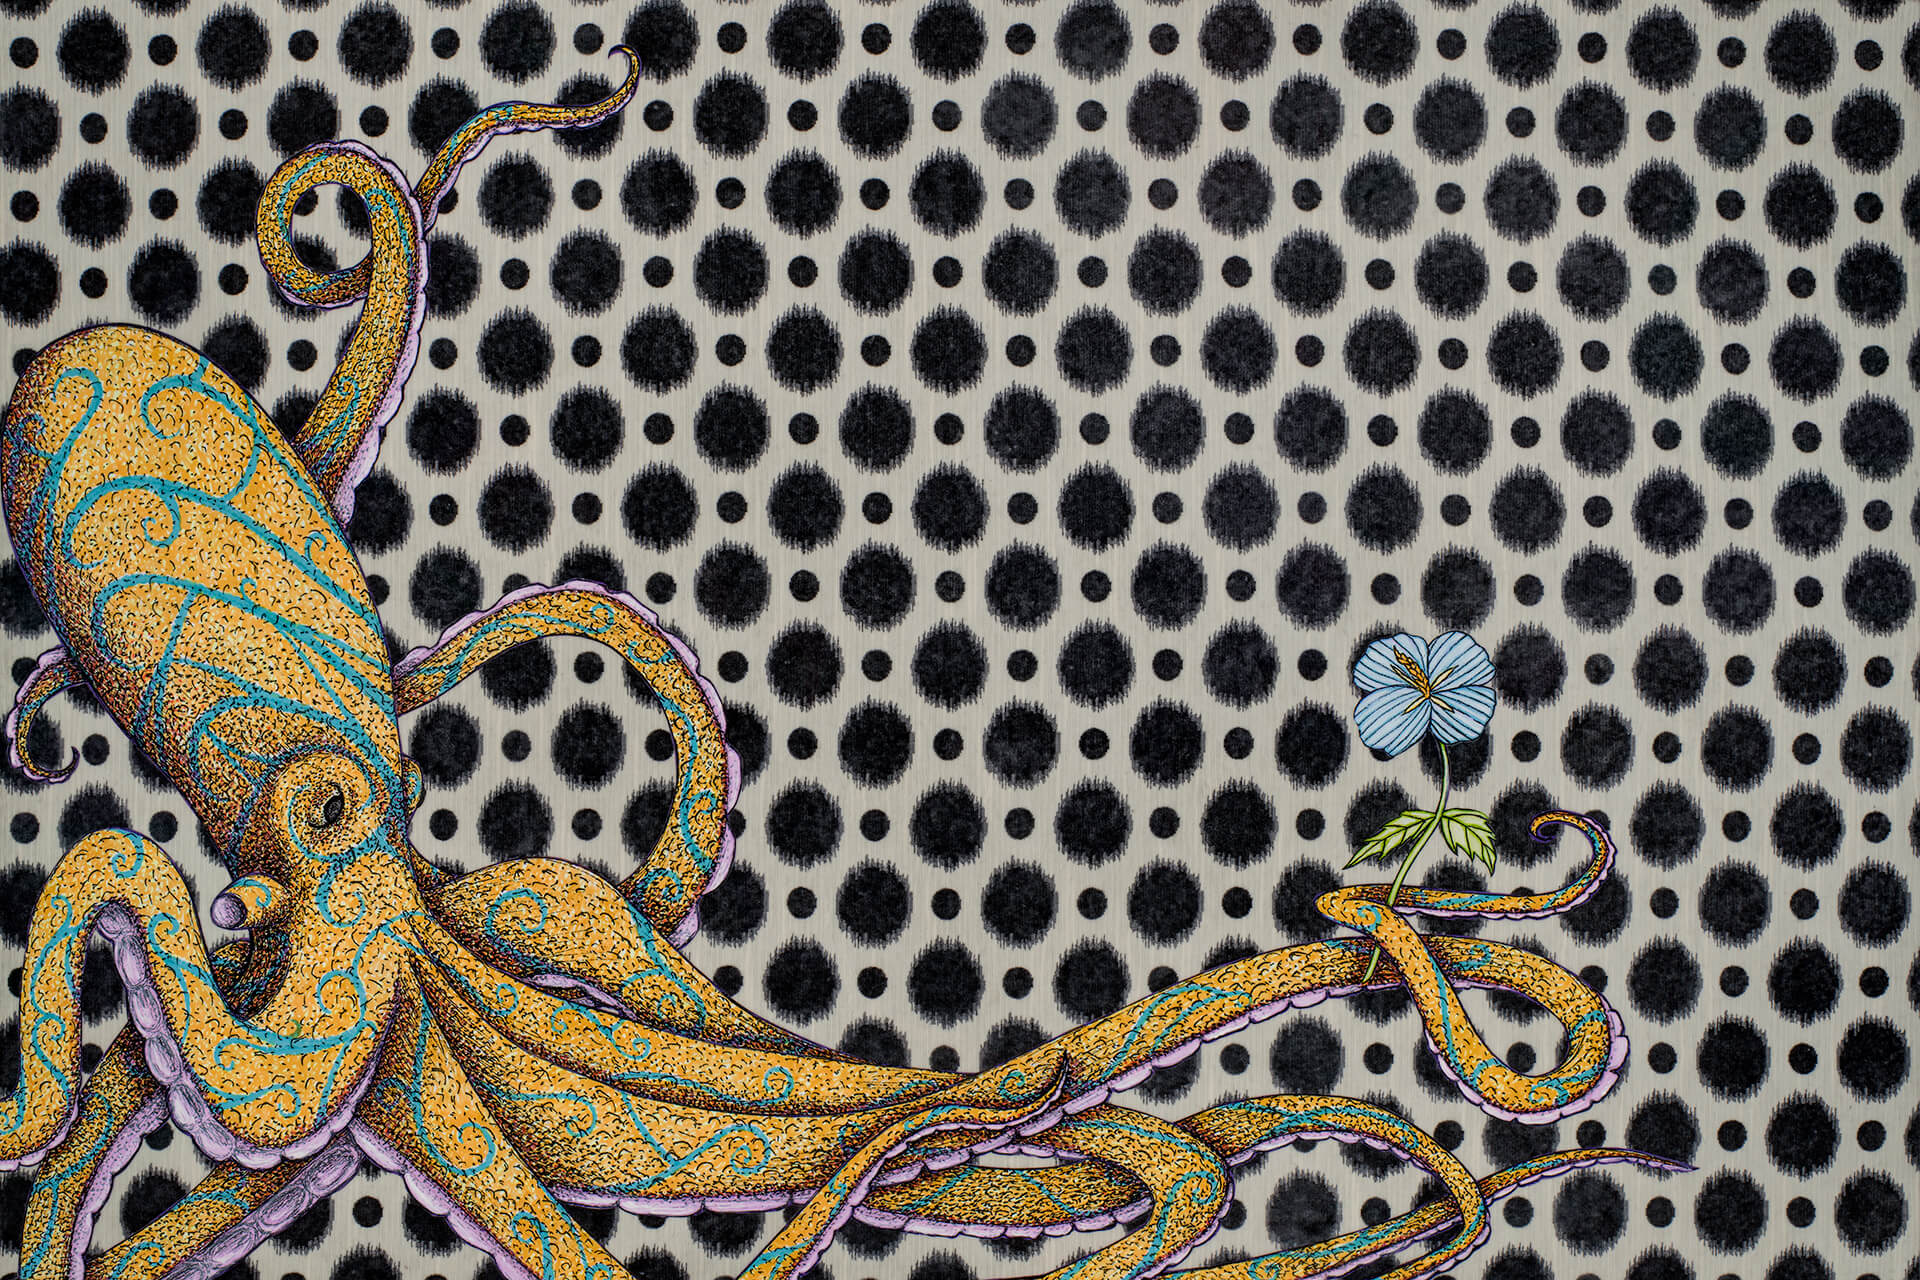 ‘Octopus and Hibiscus’, 35” x 28”, SOLD $550